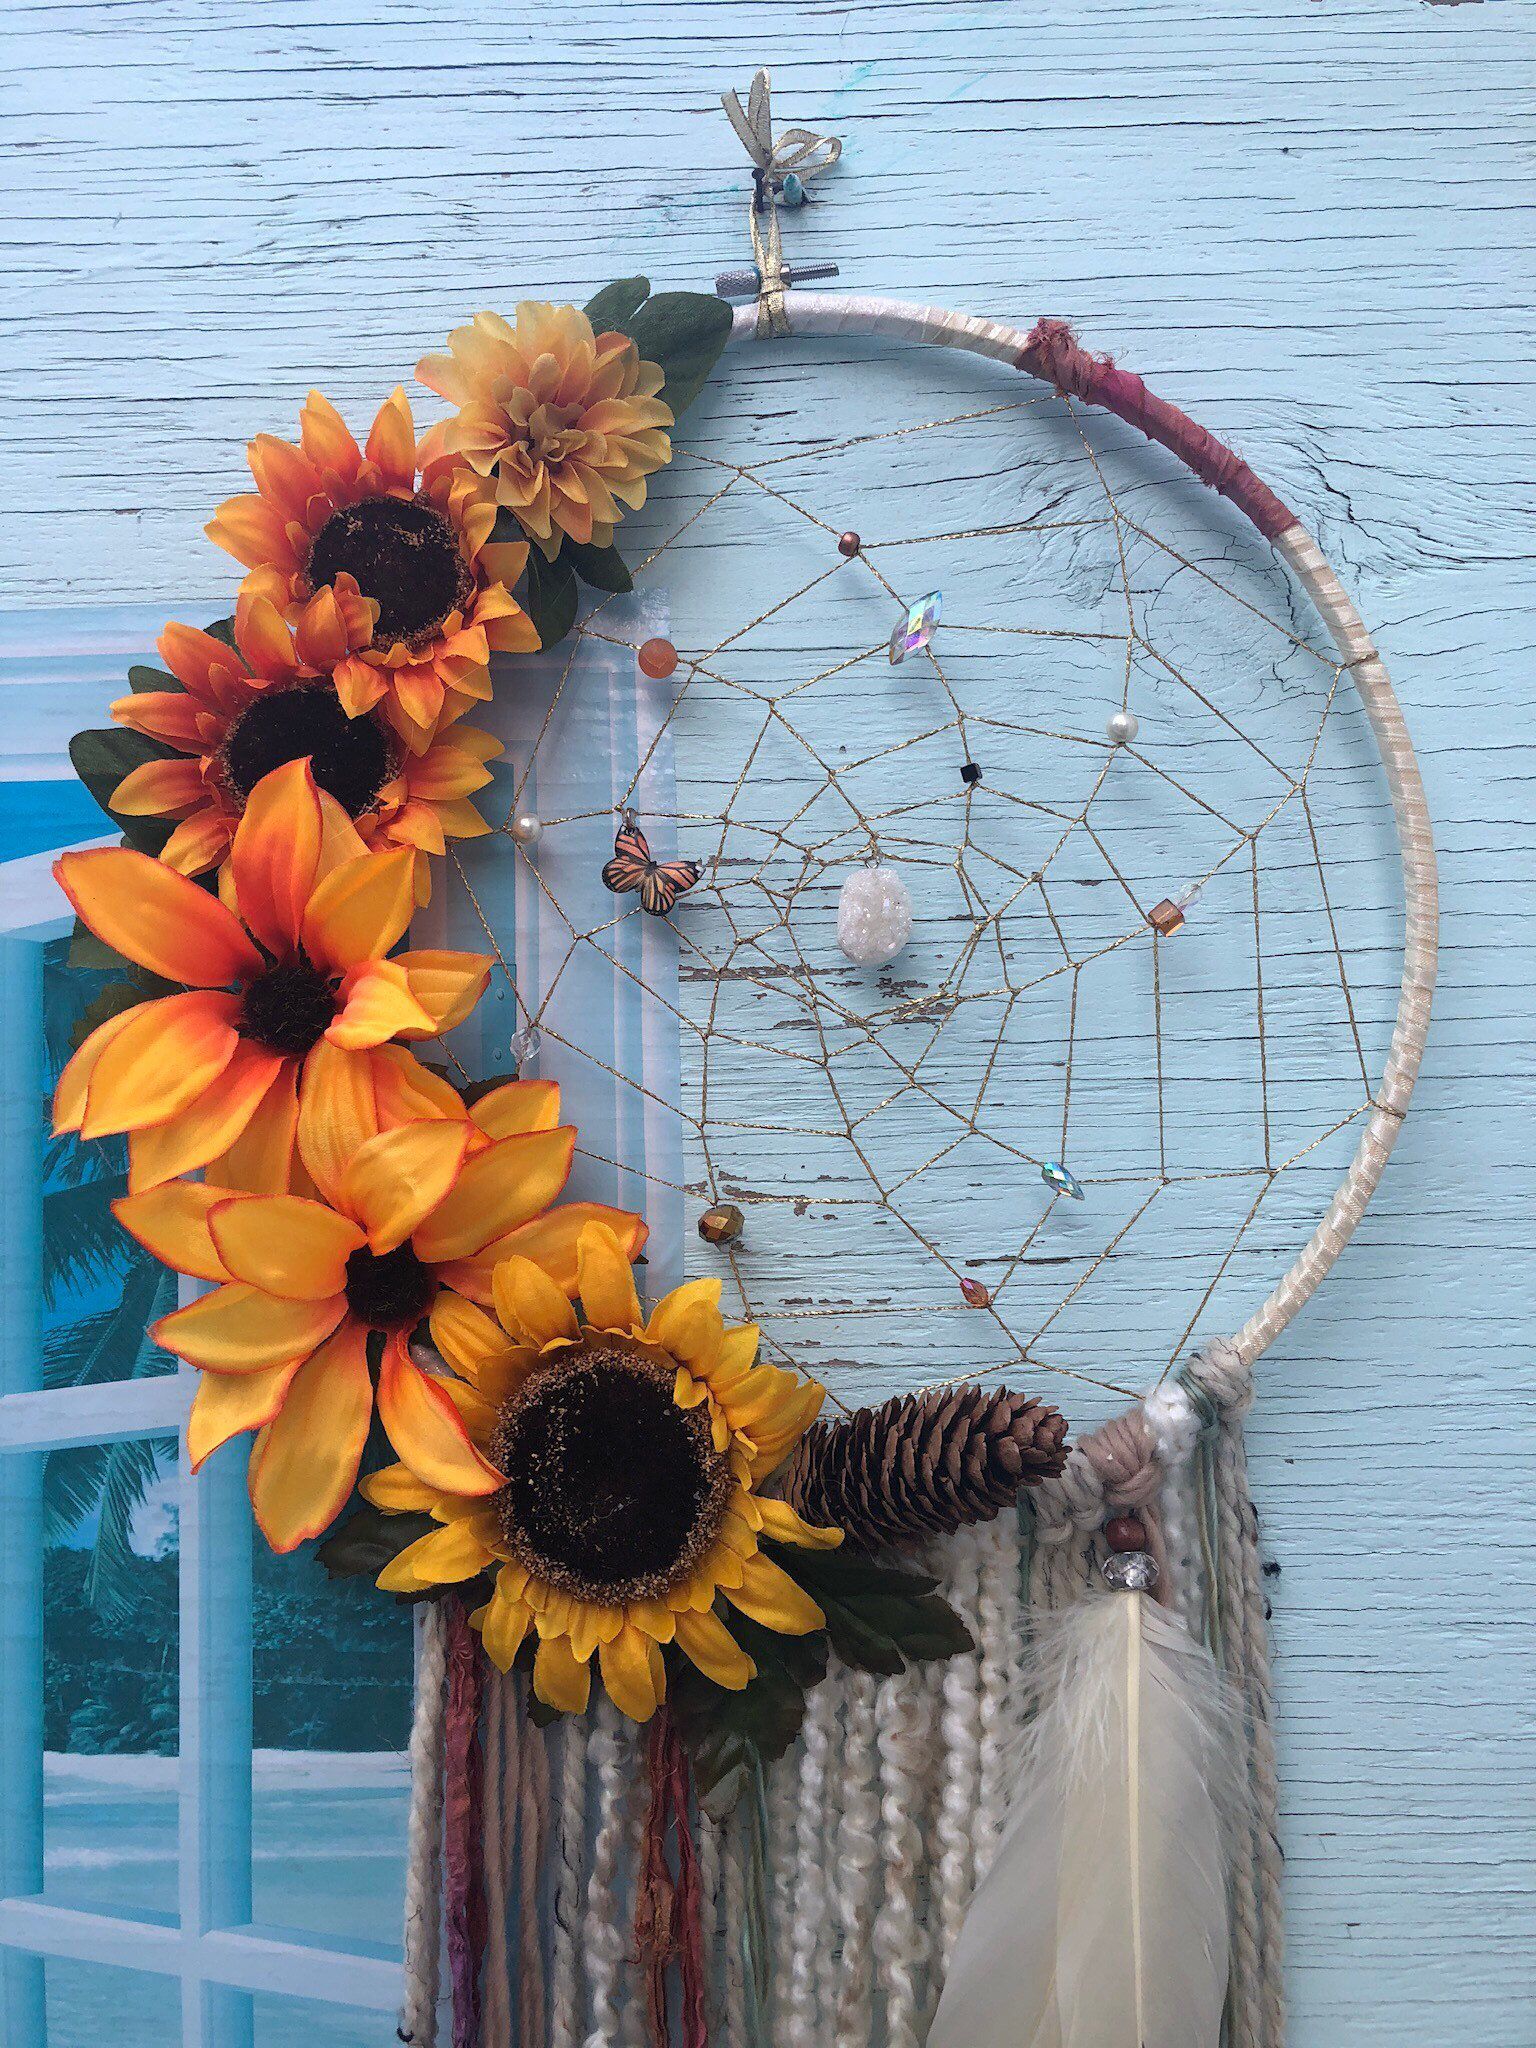 Your place to buy and sell all things handmade - Your place to buy and sell all things handmade -   14 diy Dream Catcher sunflower ideas